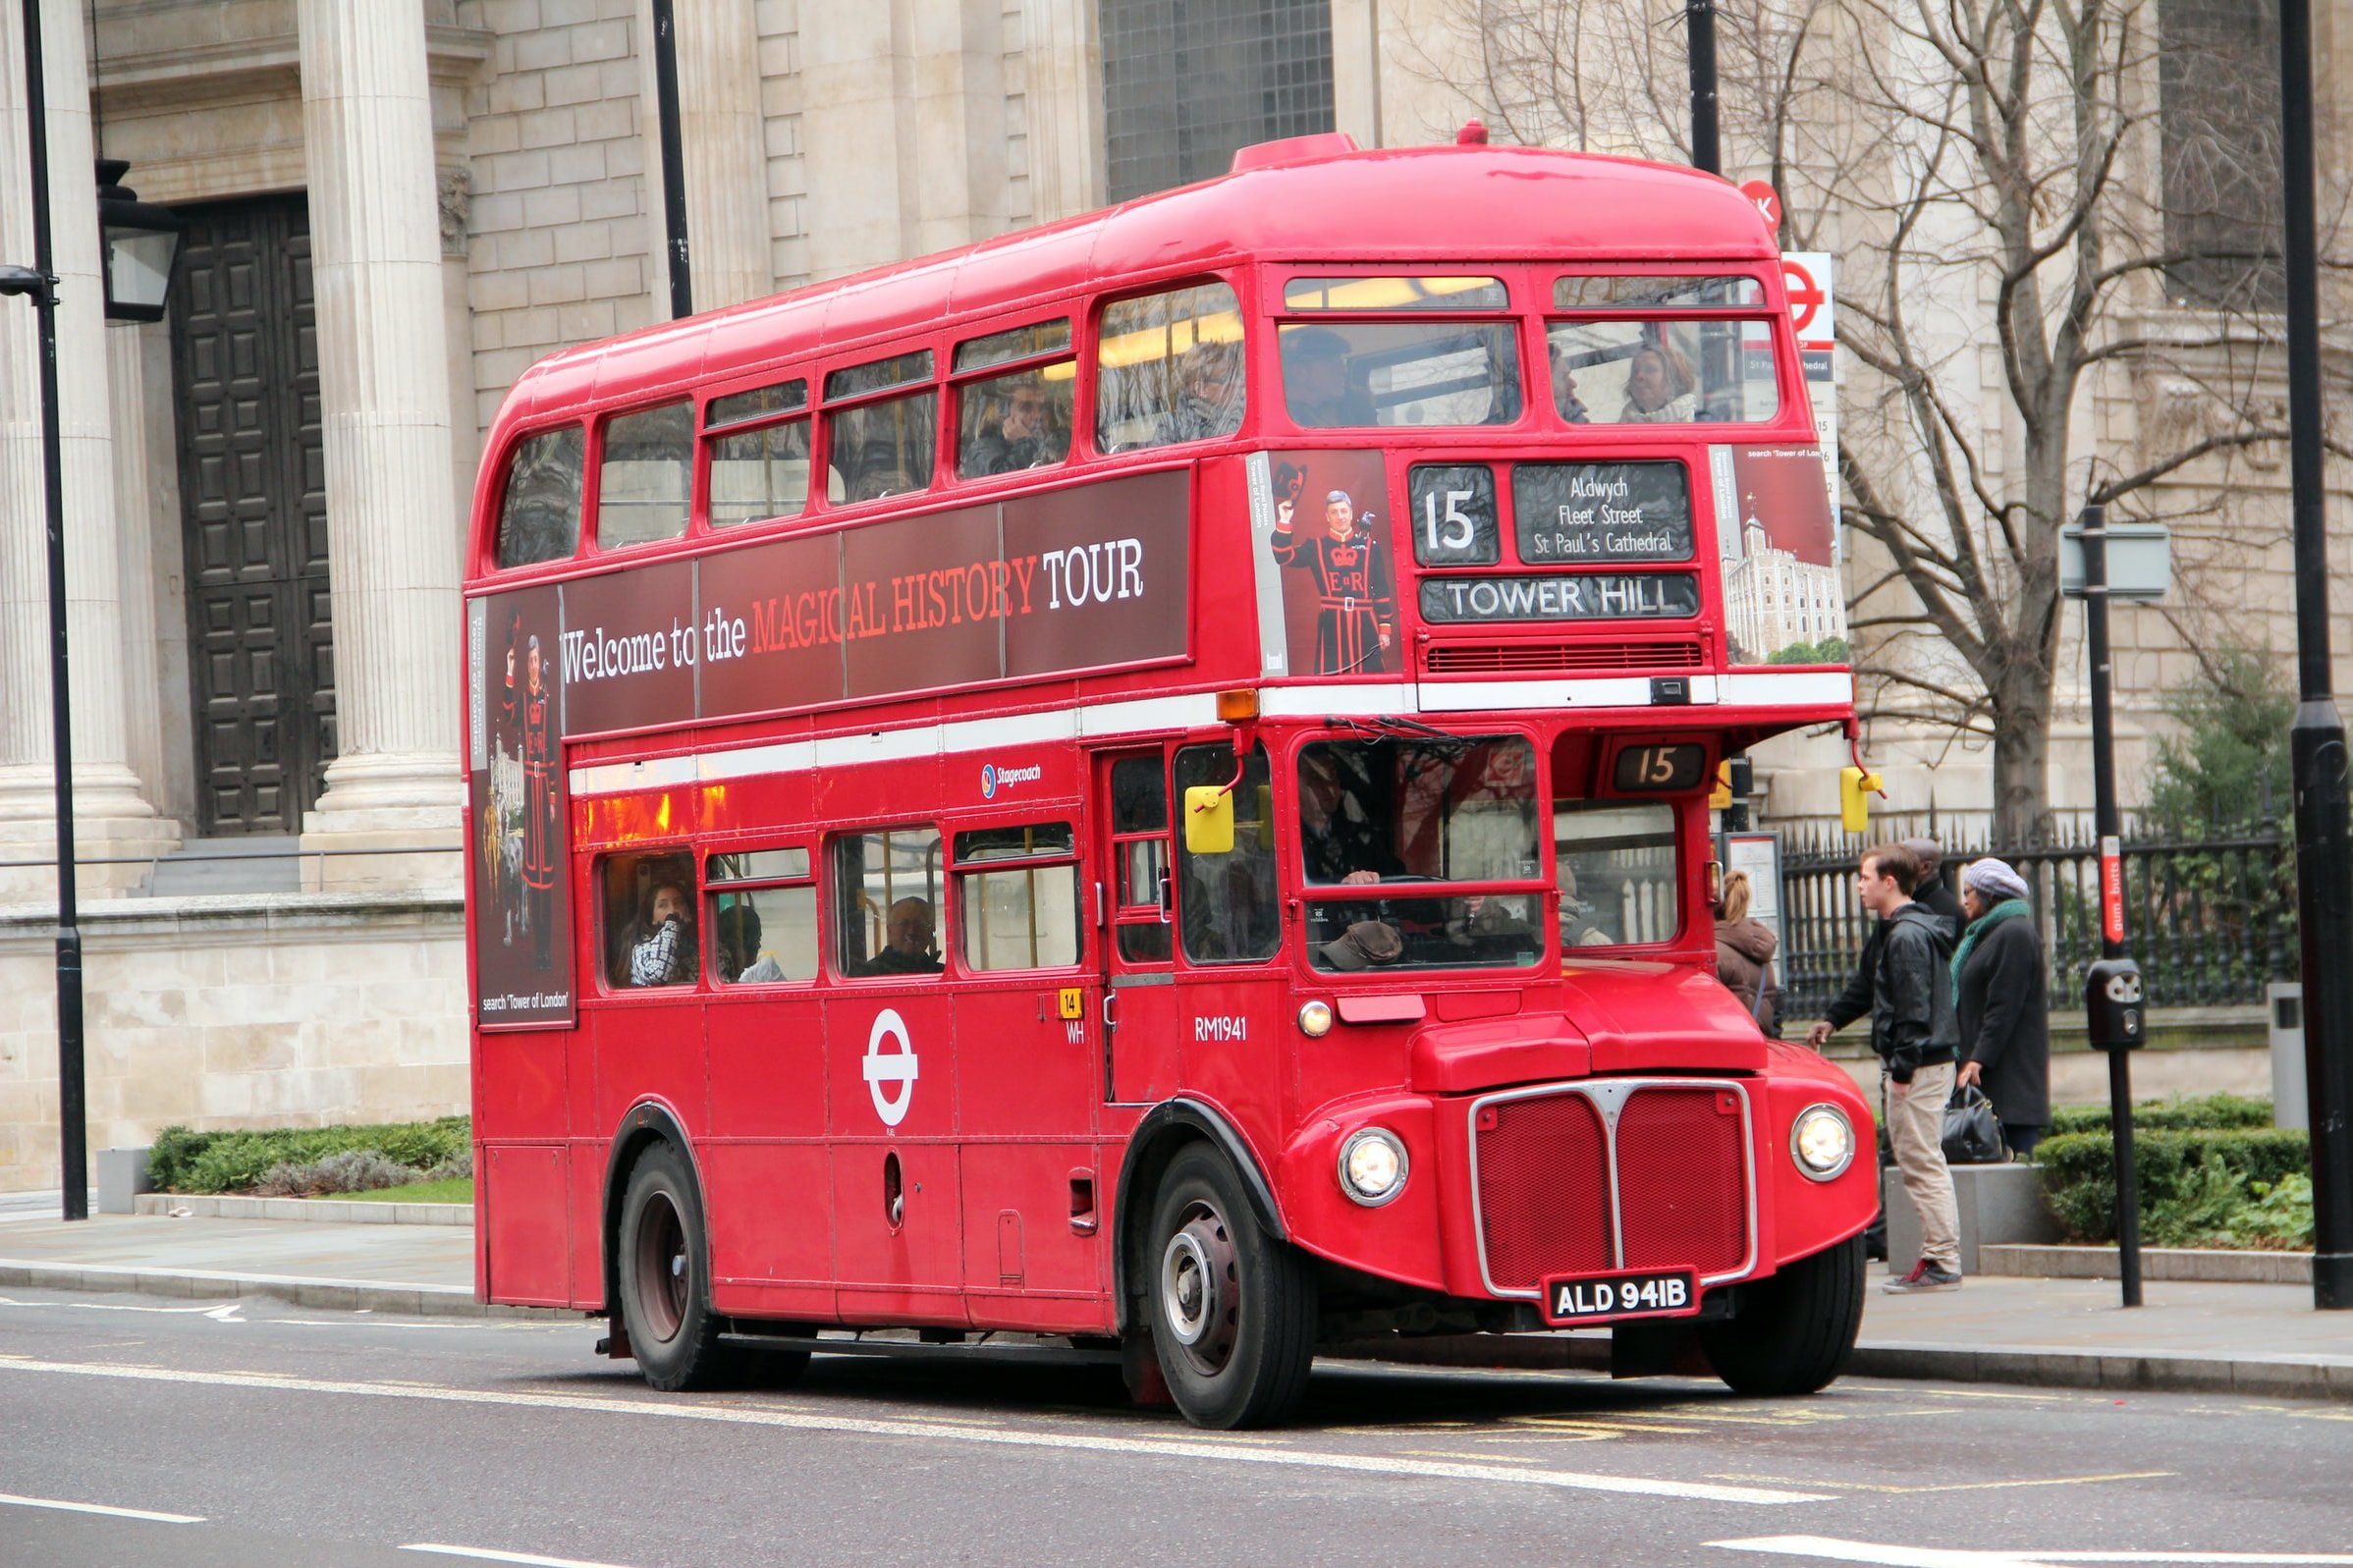 Image of a classic red Routemaster London double-decker bus